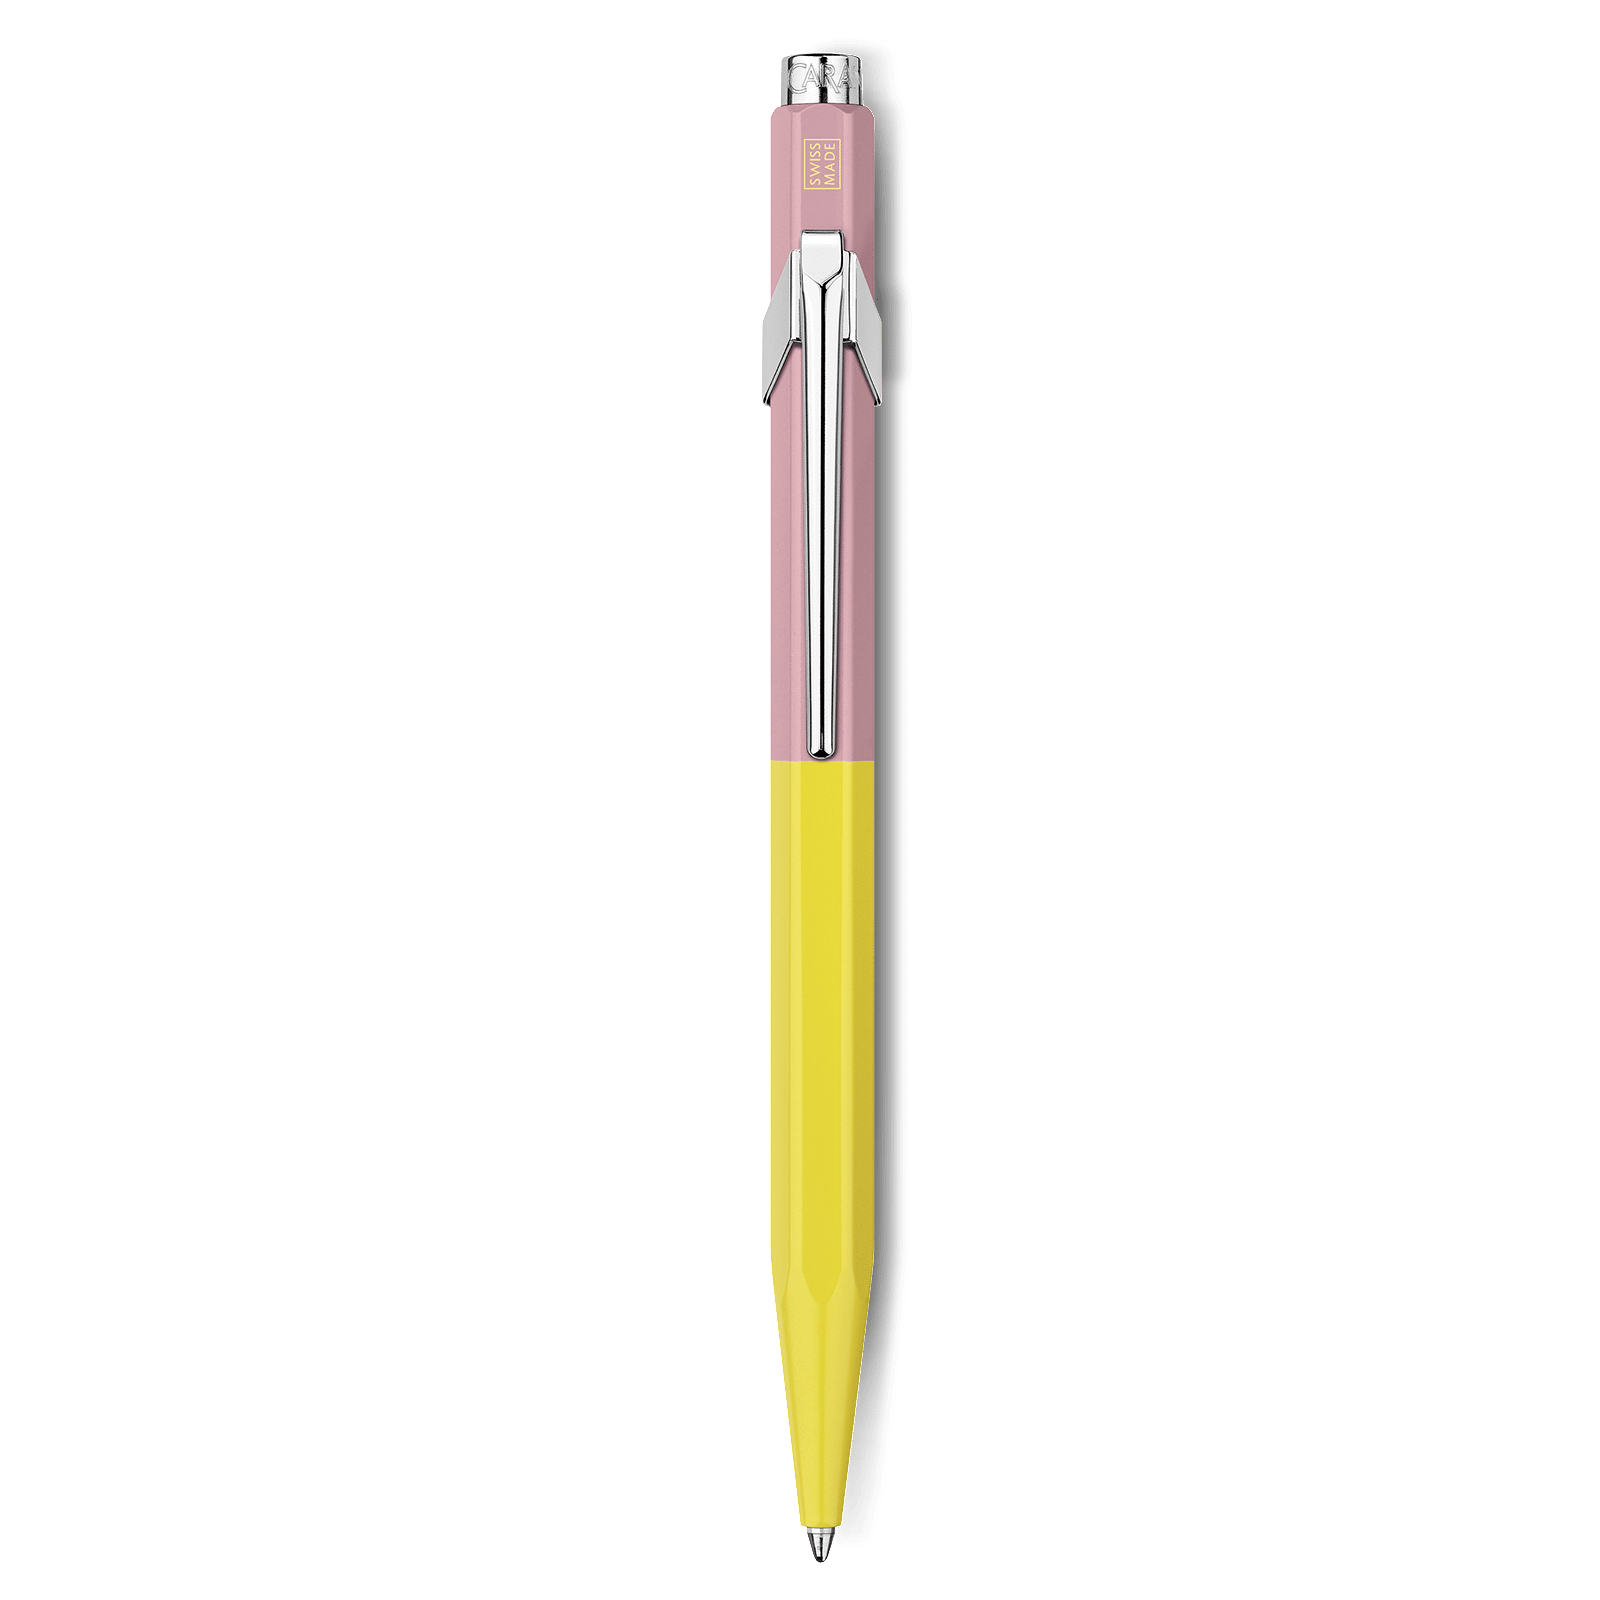 Caran D'Ache + Paul Smith Edition 4 849 Limited Edition Chartreuse Rose Ballpoint Pen - Pencraft the boutique